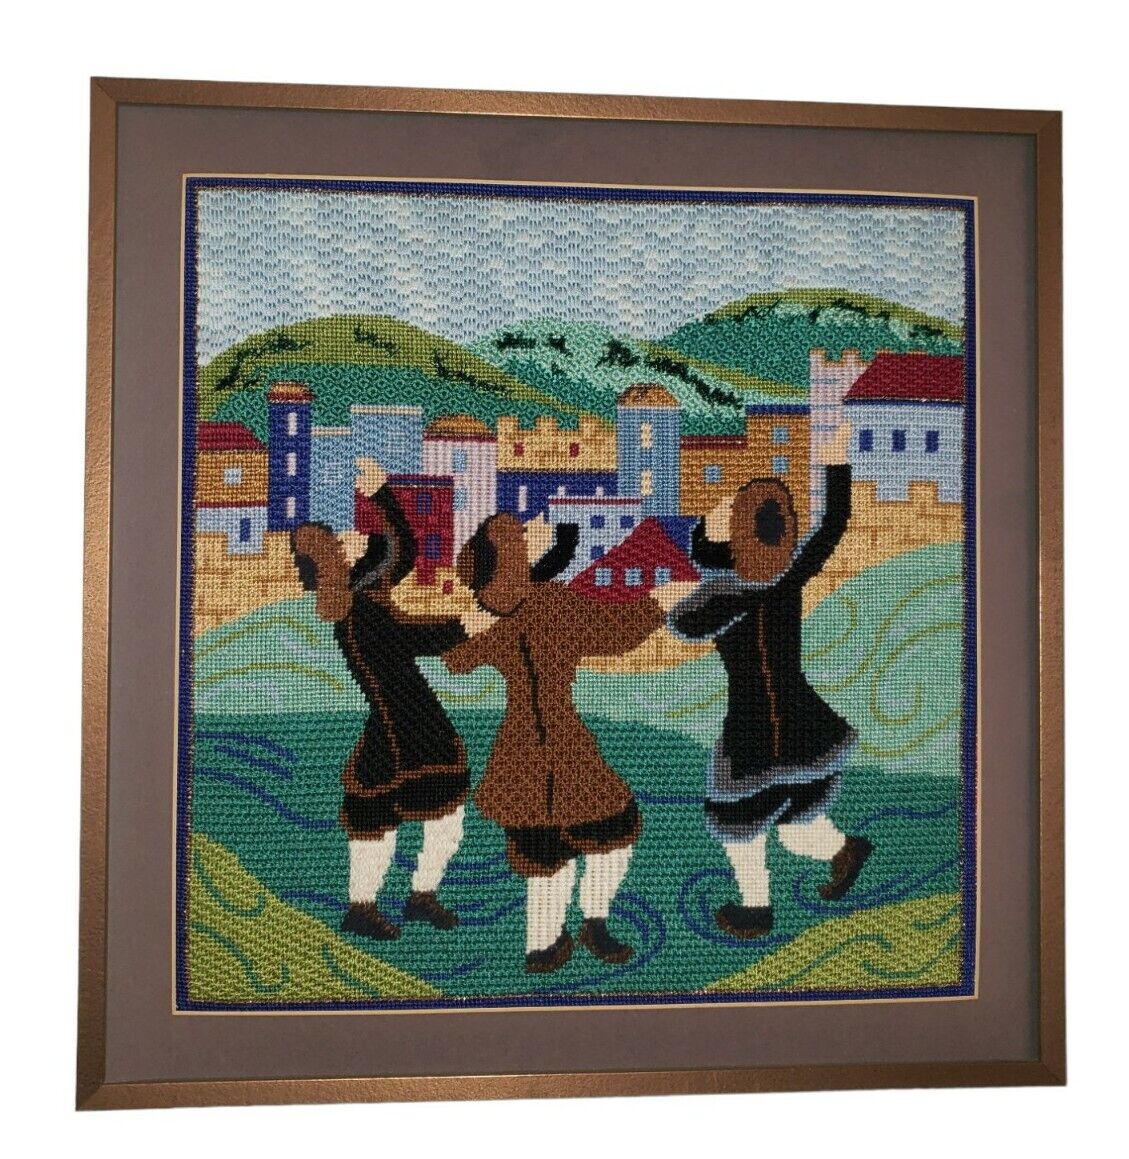 Stunning Three Hasidic Men Dancing Completed Needlepoint Framed